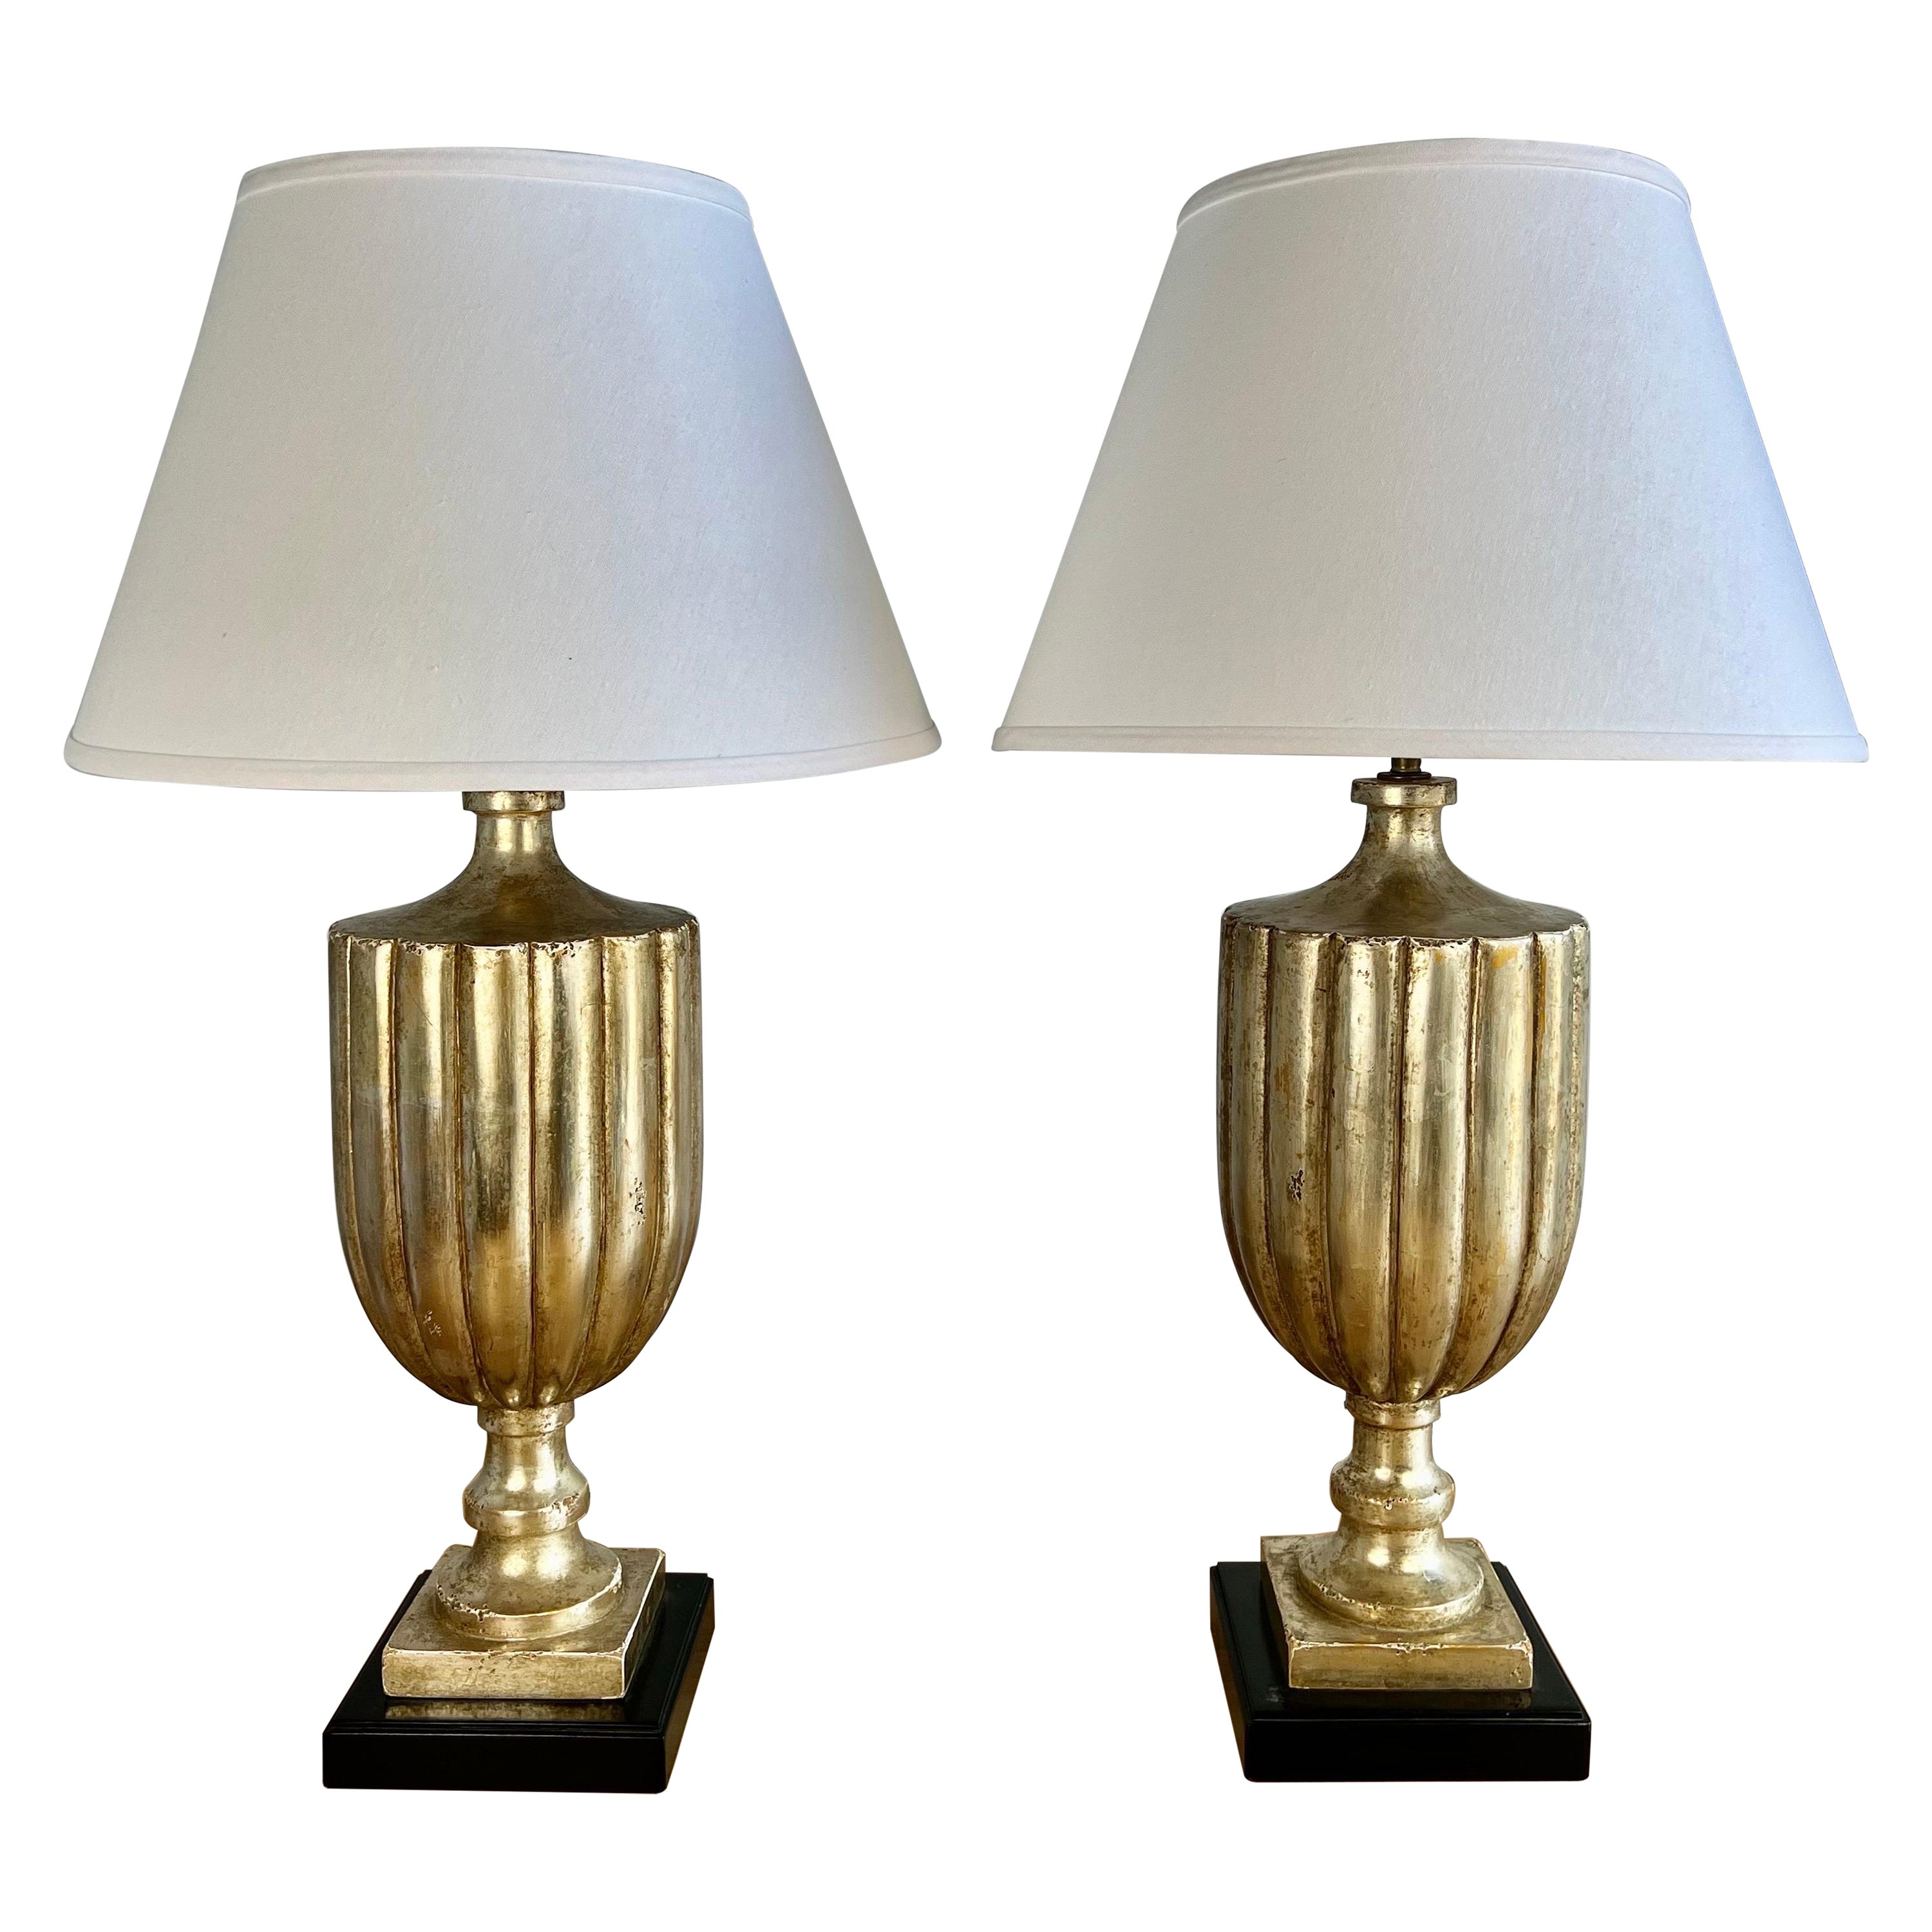 Pair of Borghese Fluted Urn Lamps w/ Linen Shades For Sale